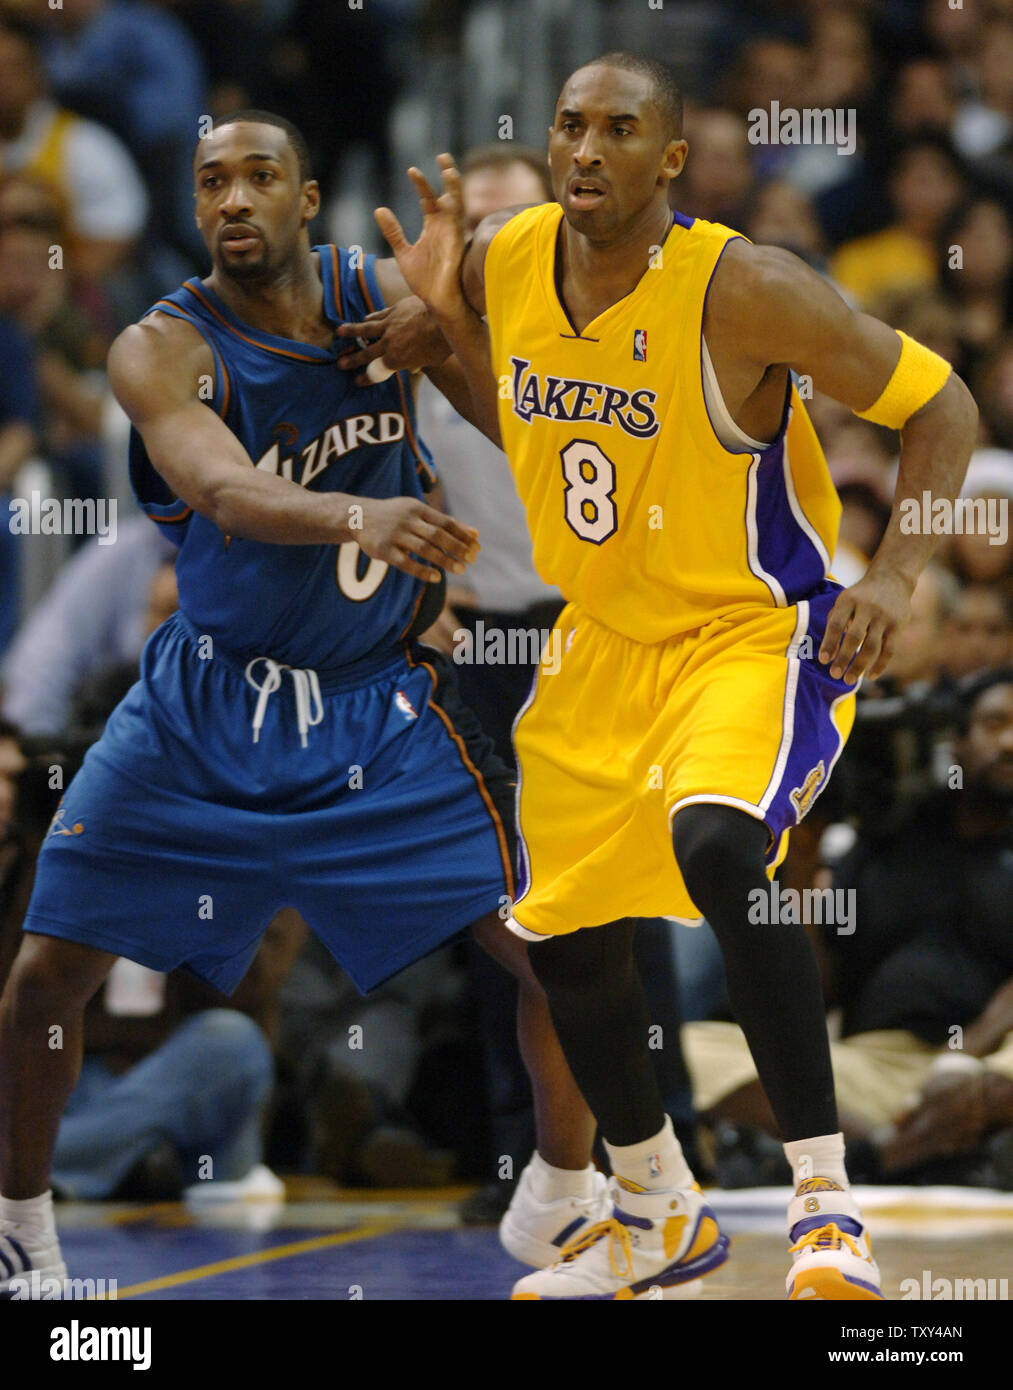 Los Angeles Lakers guard Kobe Bryant (R) and Washingtron Wizzards guard Gilbert Arenasfight for position during first quarter quarter NBA action at Staples Center in Los Angeles December 16, 2005. The Lakers defeated the Wizzards 97-91. (UPI Photo/Jim Ruymen) Stock Photo